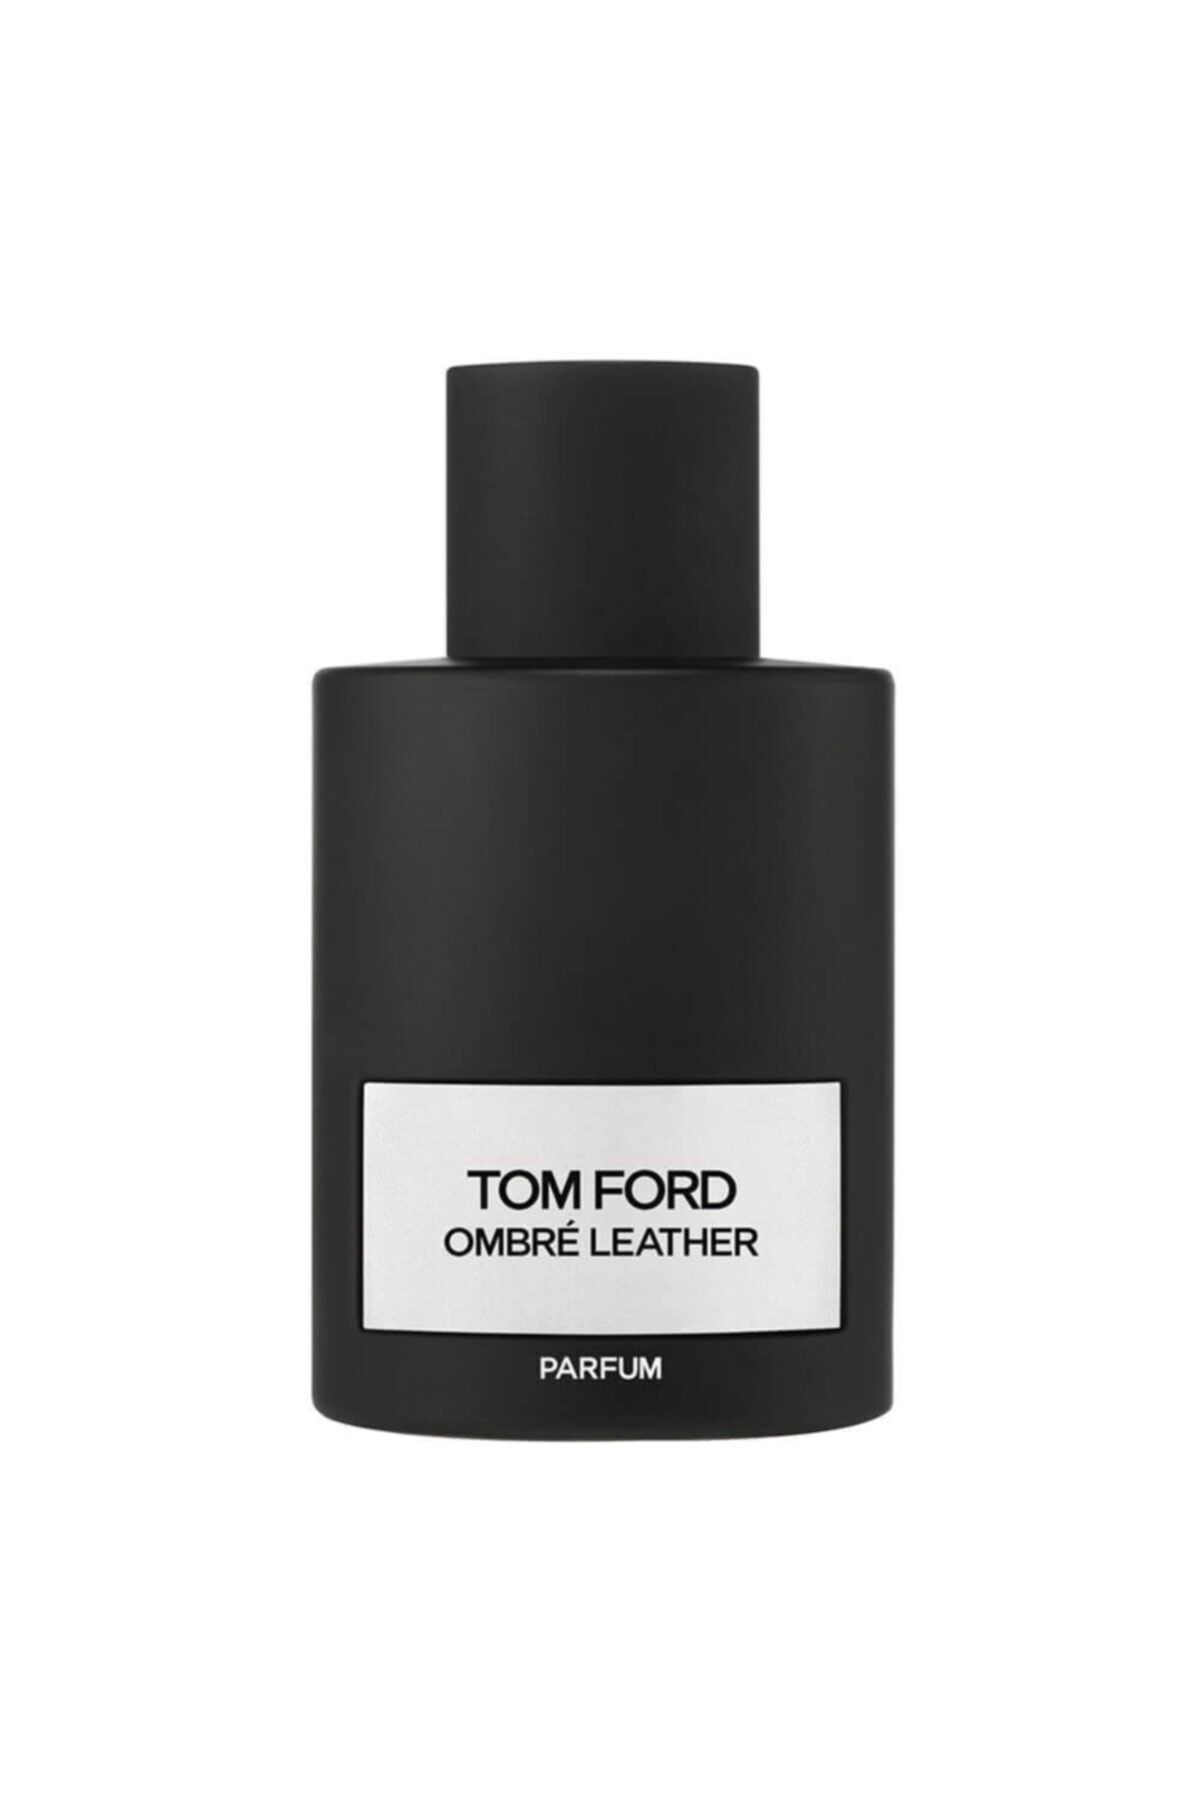 Tom Ford Ombre Leather 100 Ml Parfum